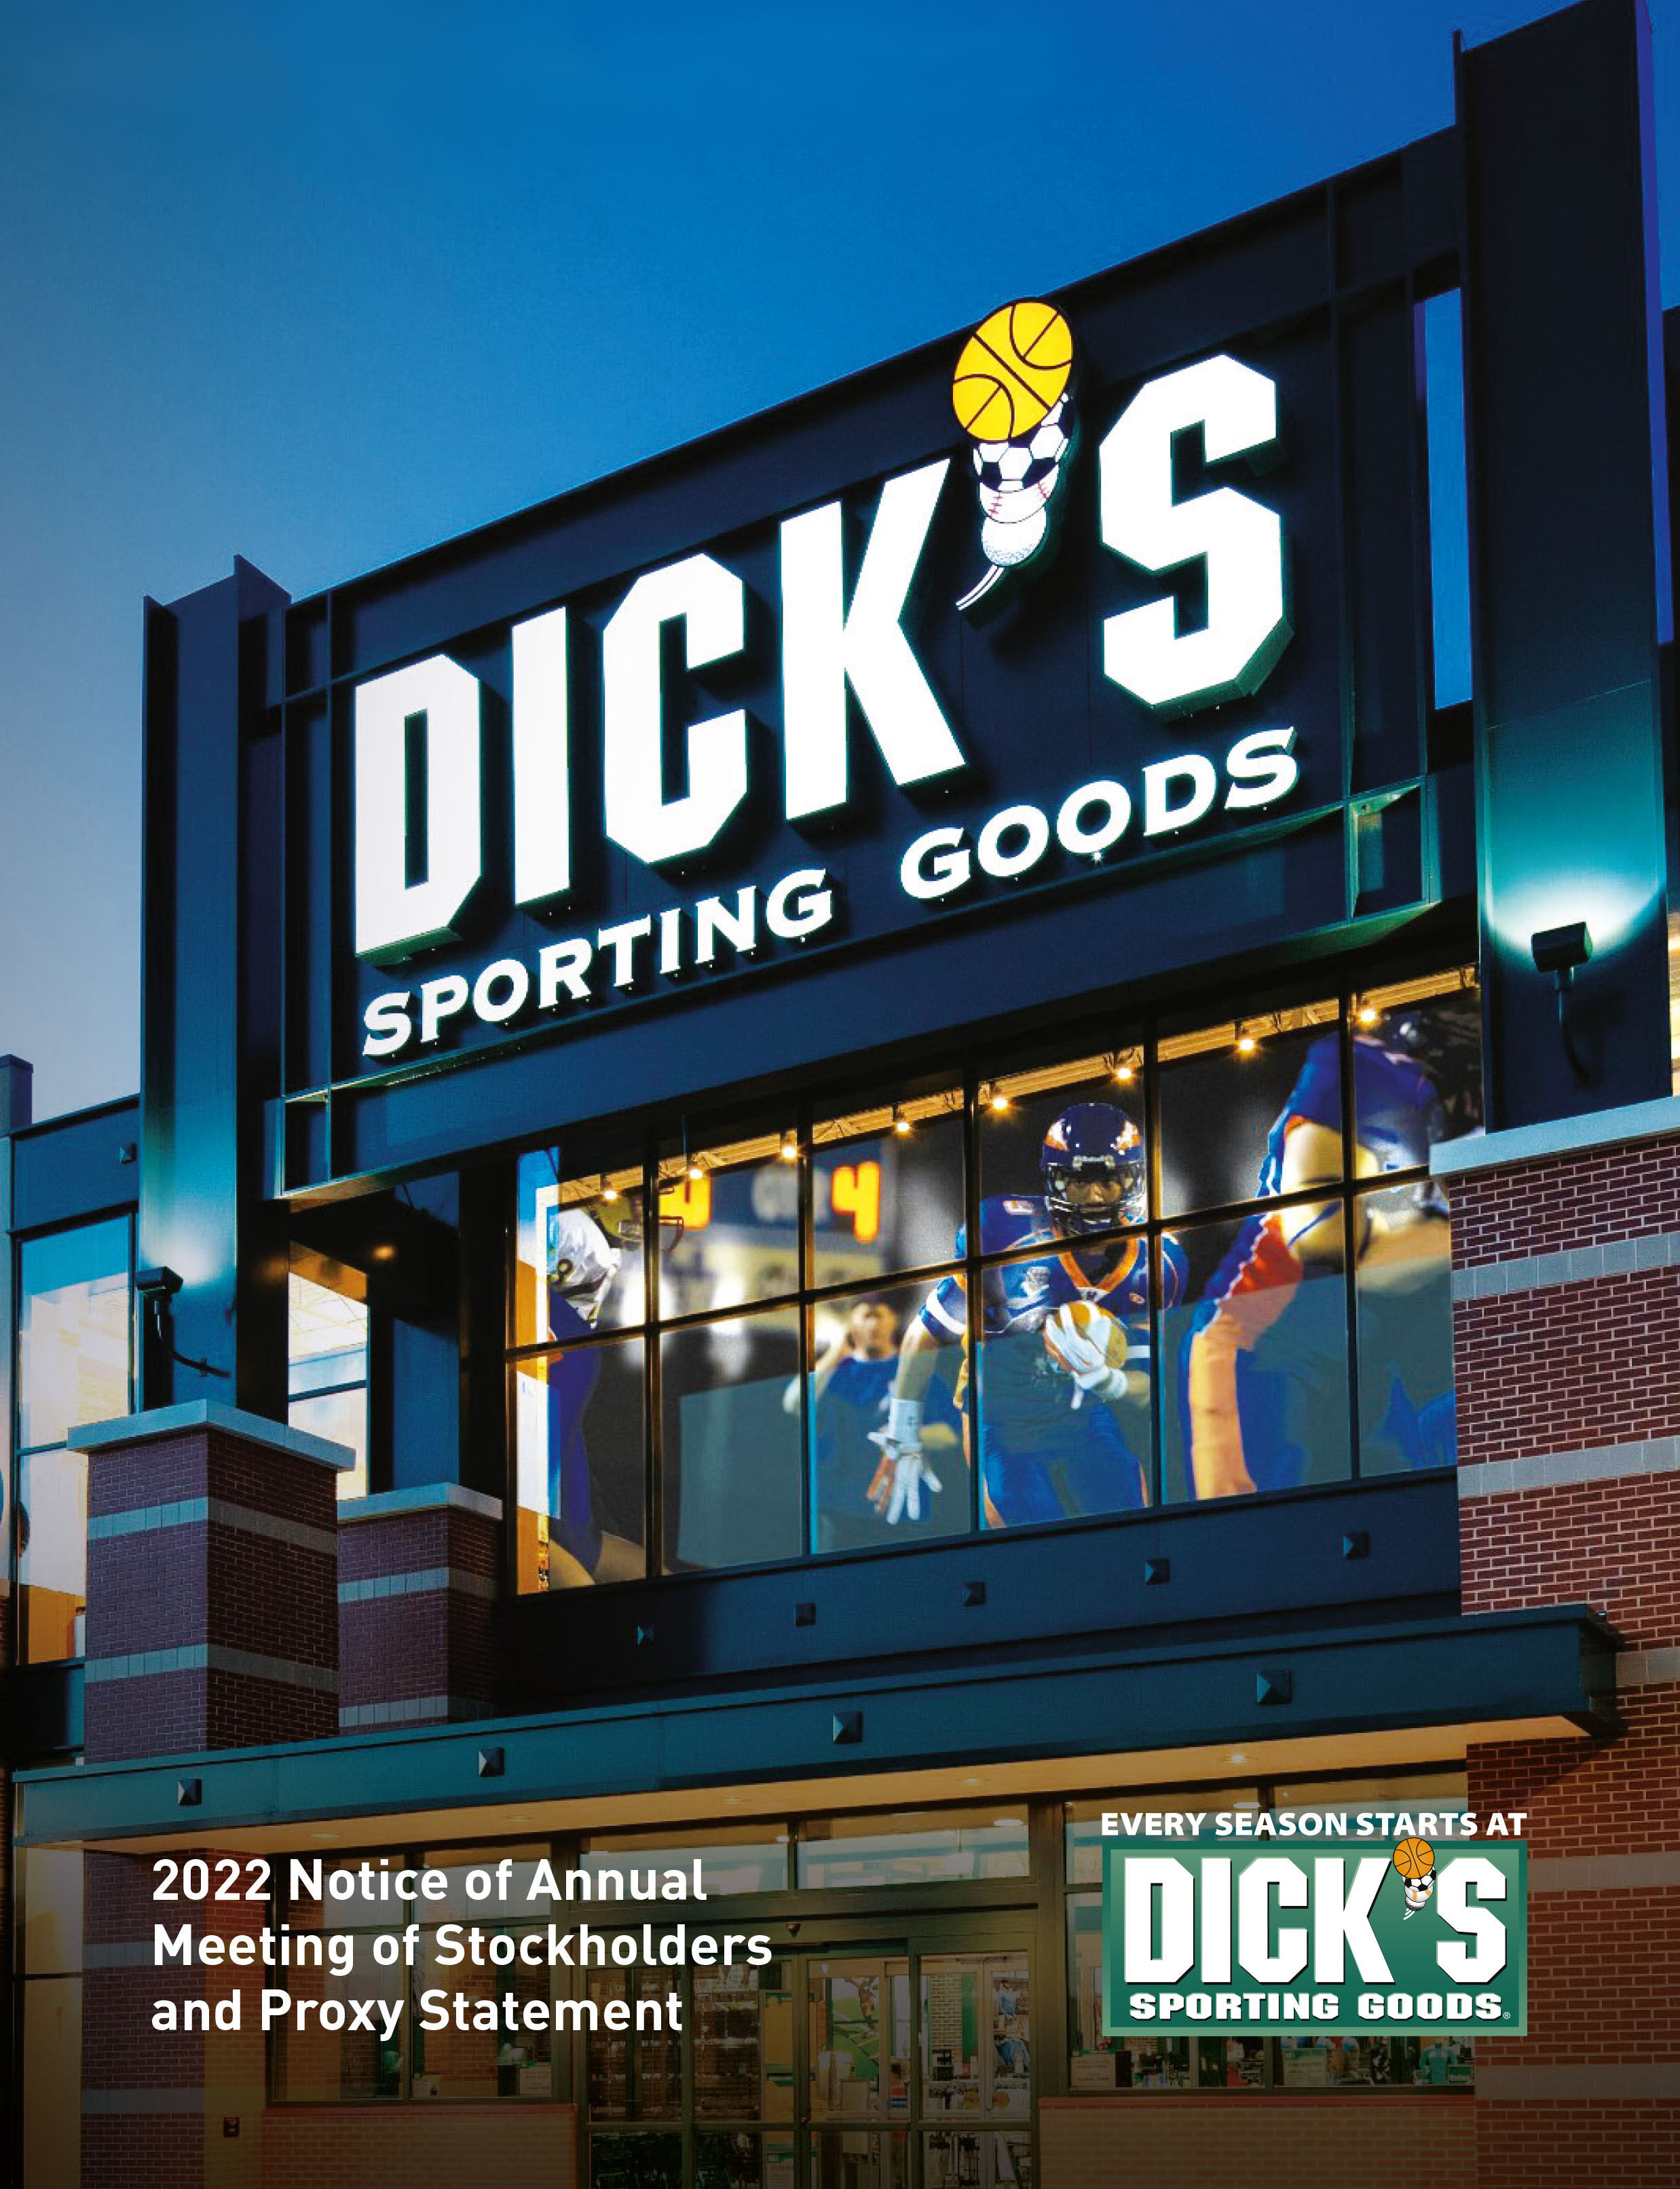 How Dick's Sporting Goods uses data to make its products stand out